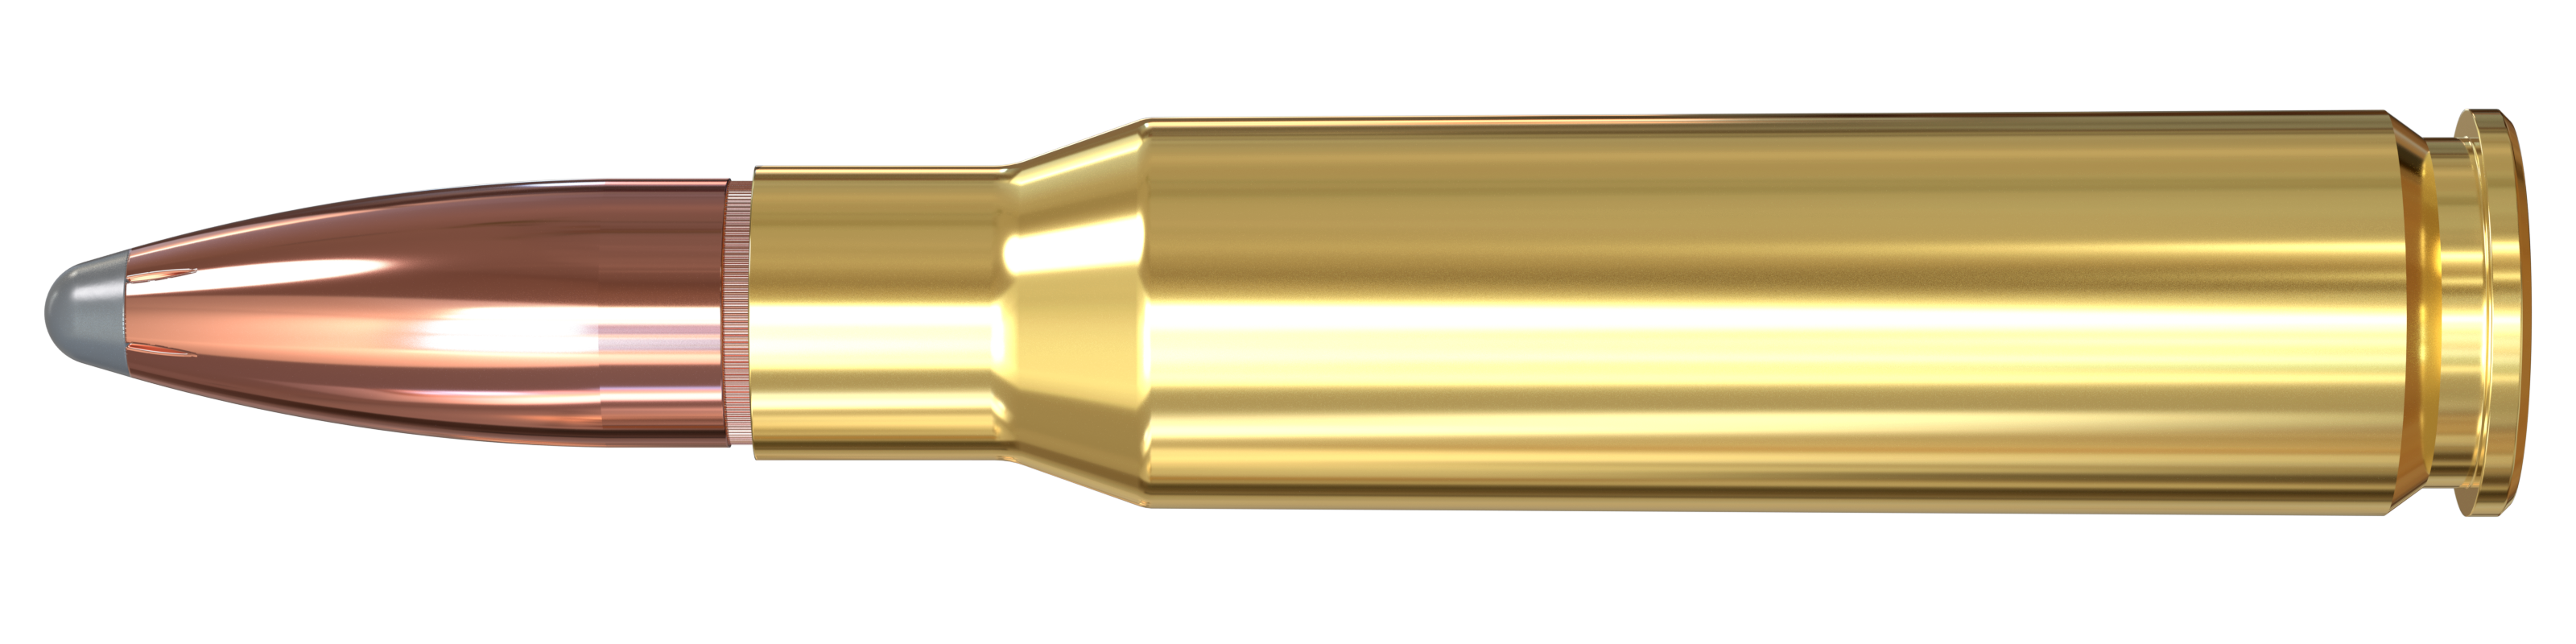 358 Winchester, 200 Grain Features